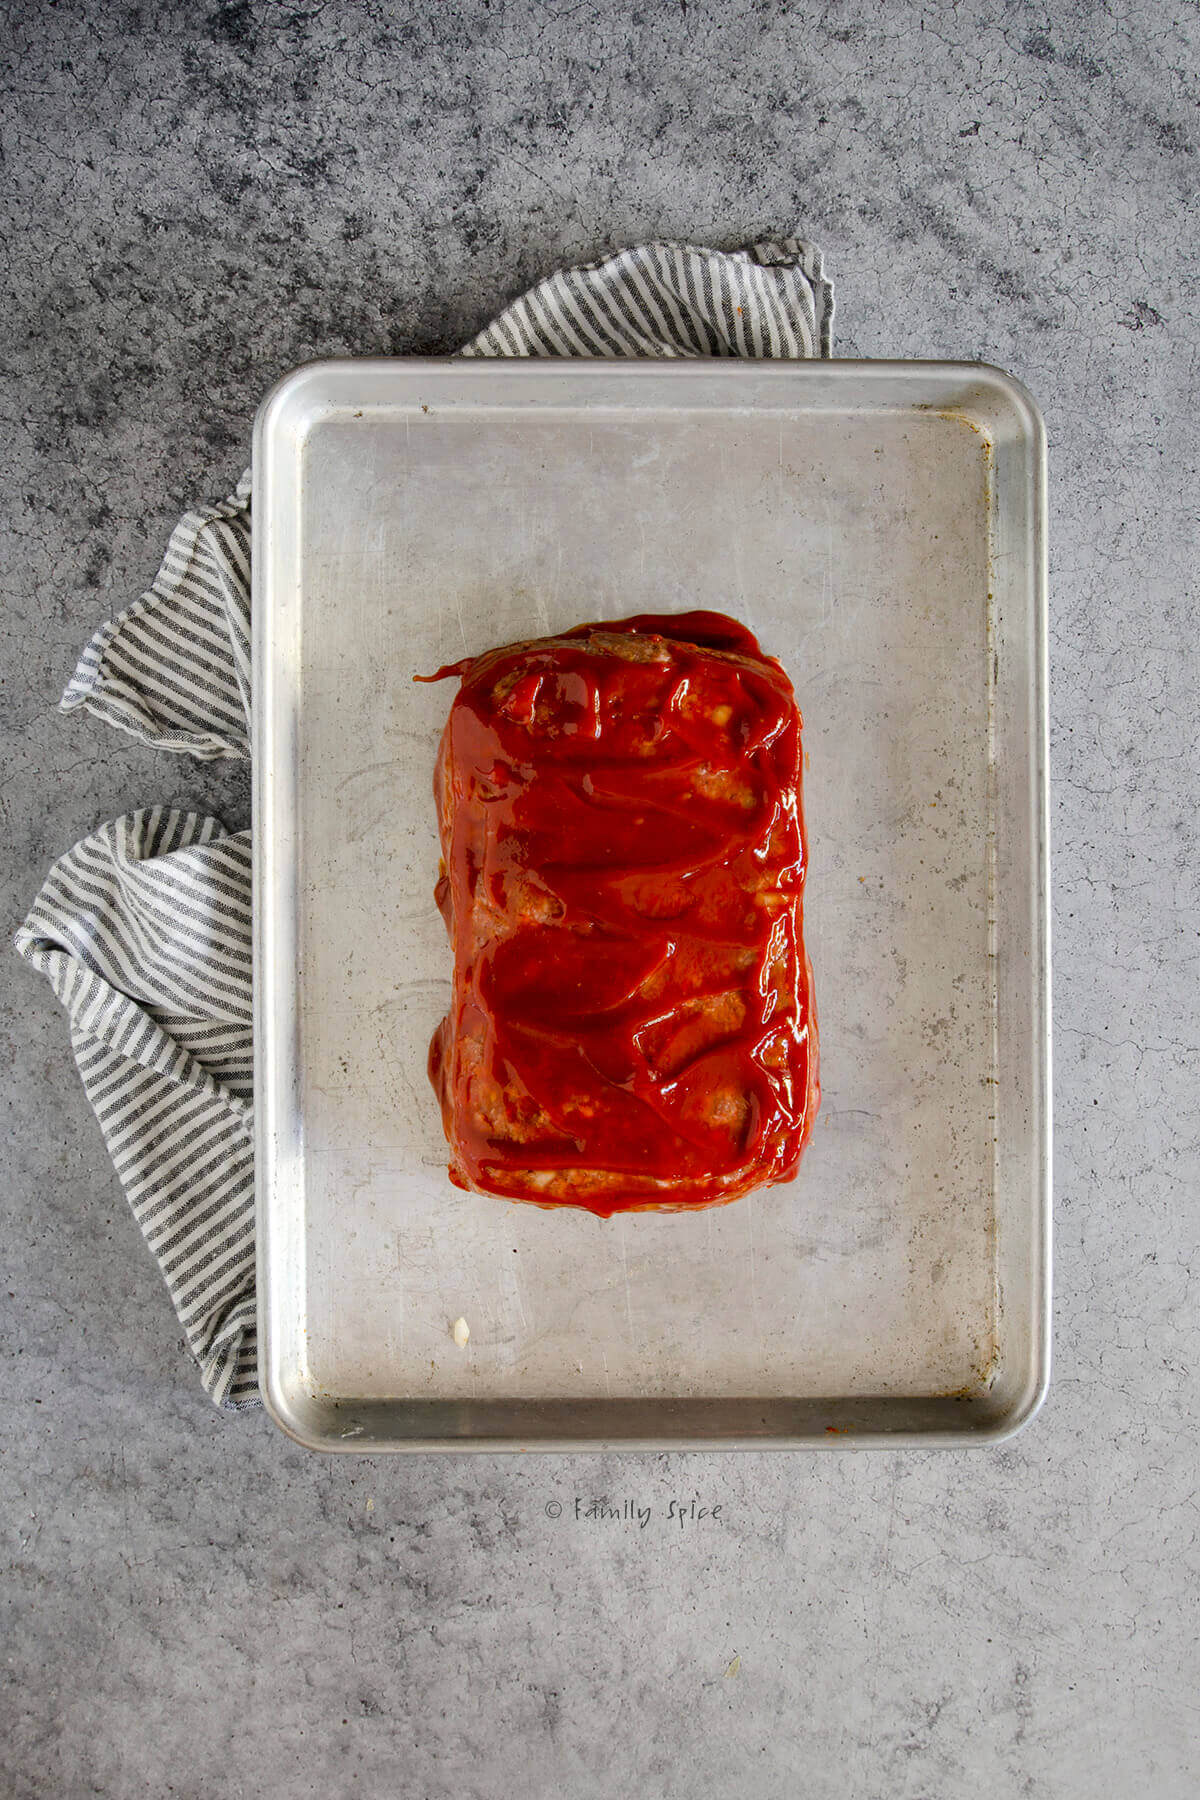 Meatloaf mixture formed into a rectangle topped with ketchup on a baking sheet